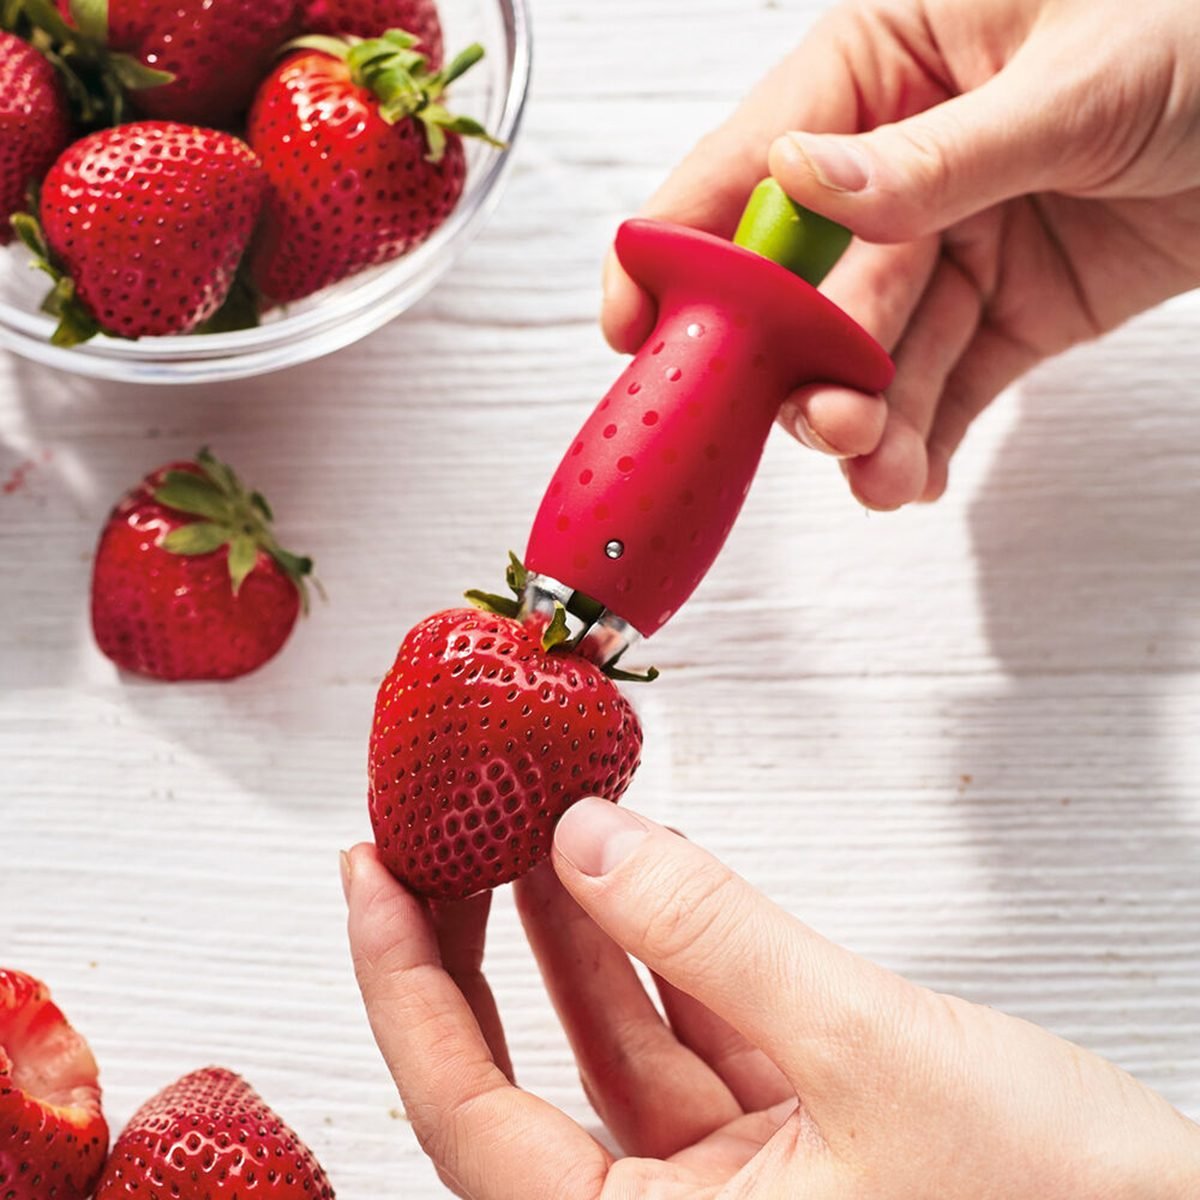 You Should Hull Your Strawberries With a Reusable Straw